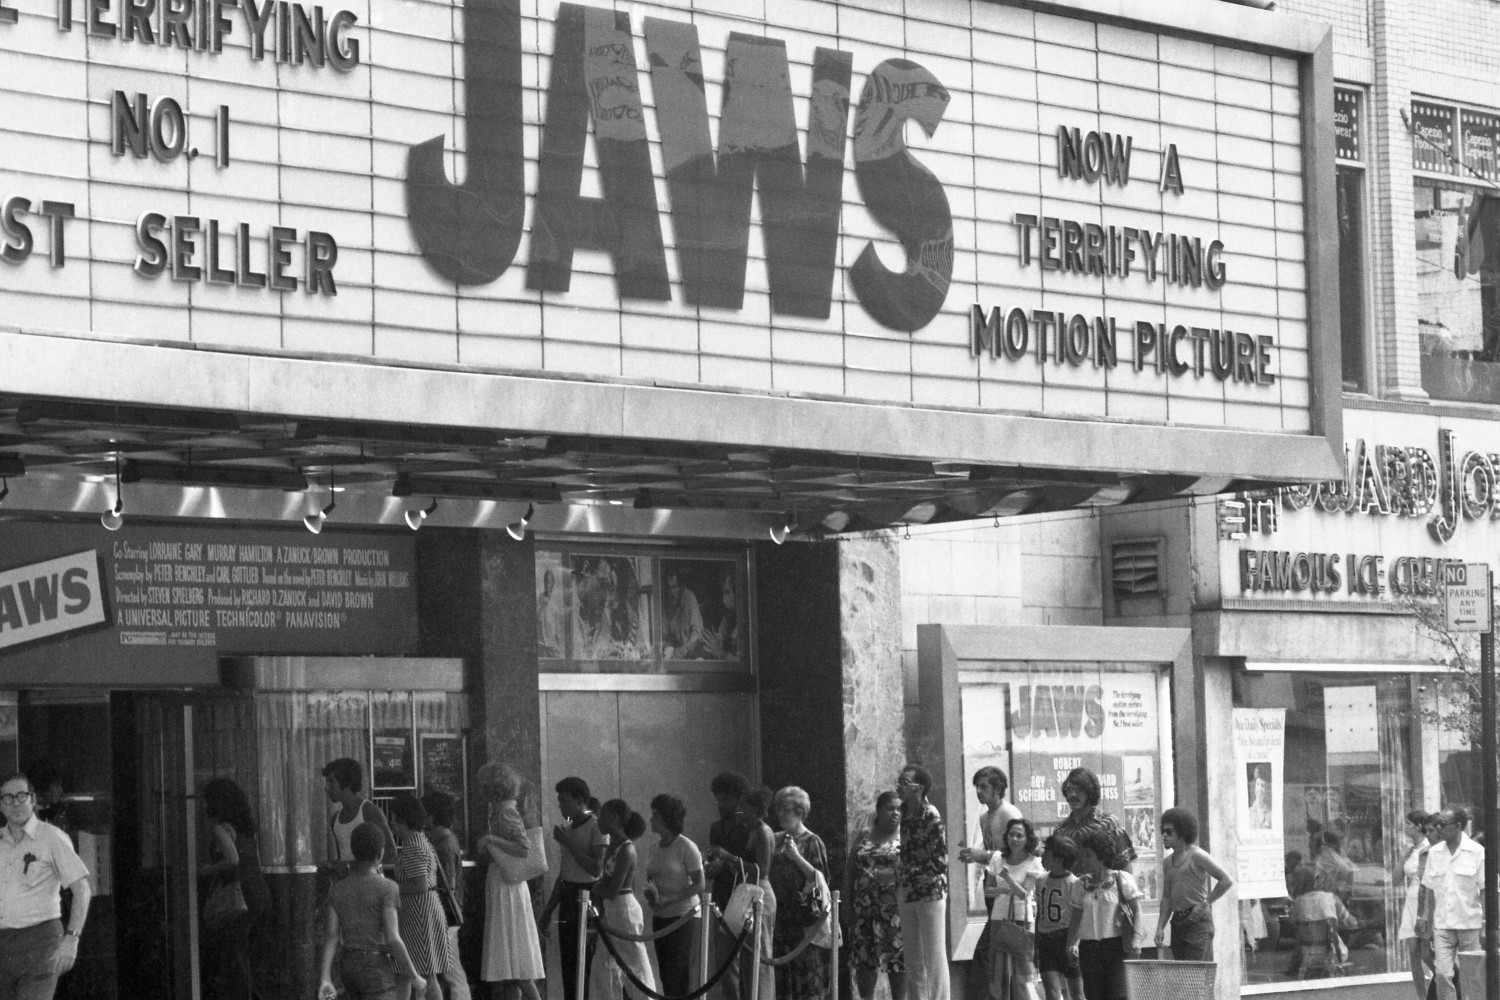 "Jaws" on the marquee at a movie theater. The movie, which turns 50 in 2025, is getting a new documentary from Spielberg documentarian Laurent Bouzereau